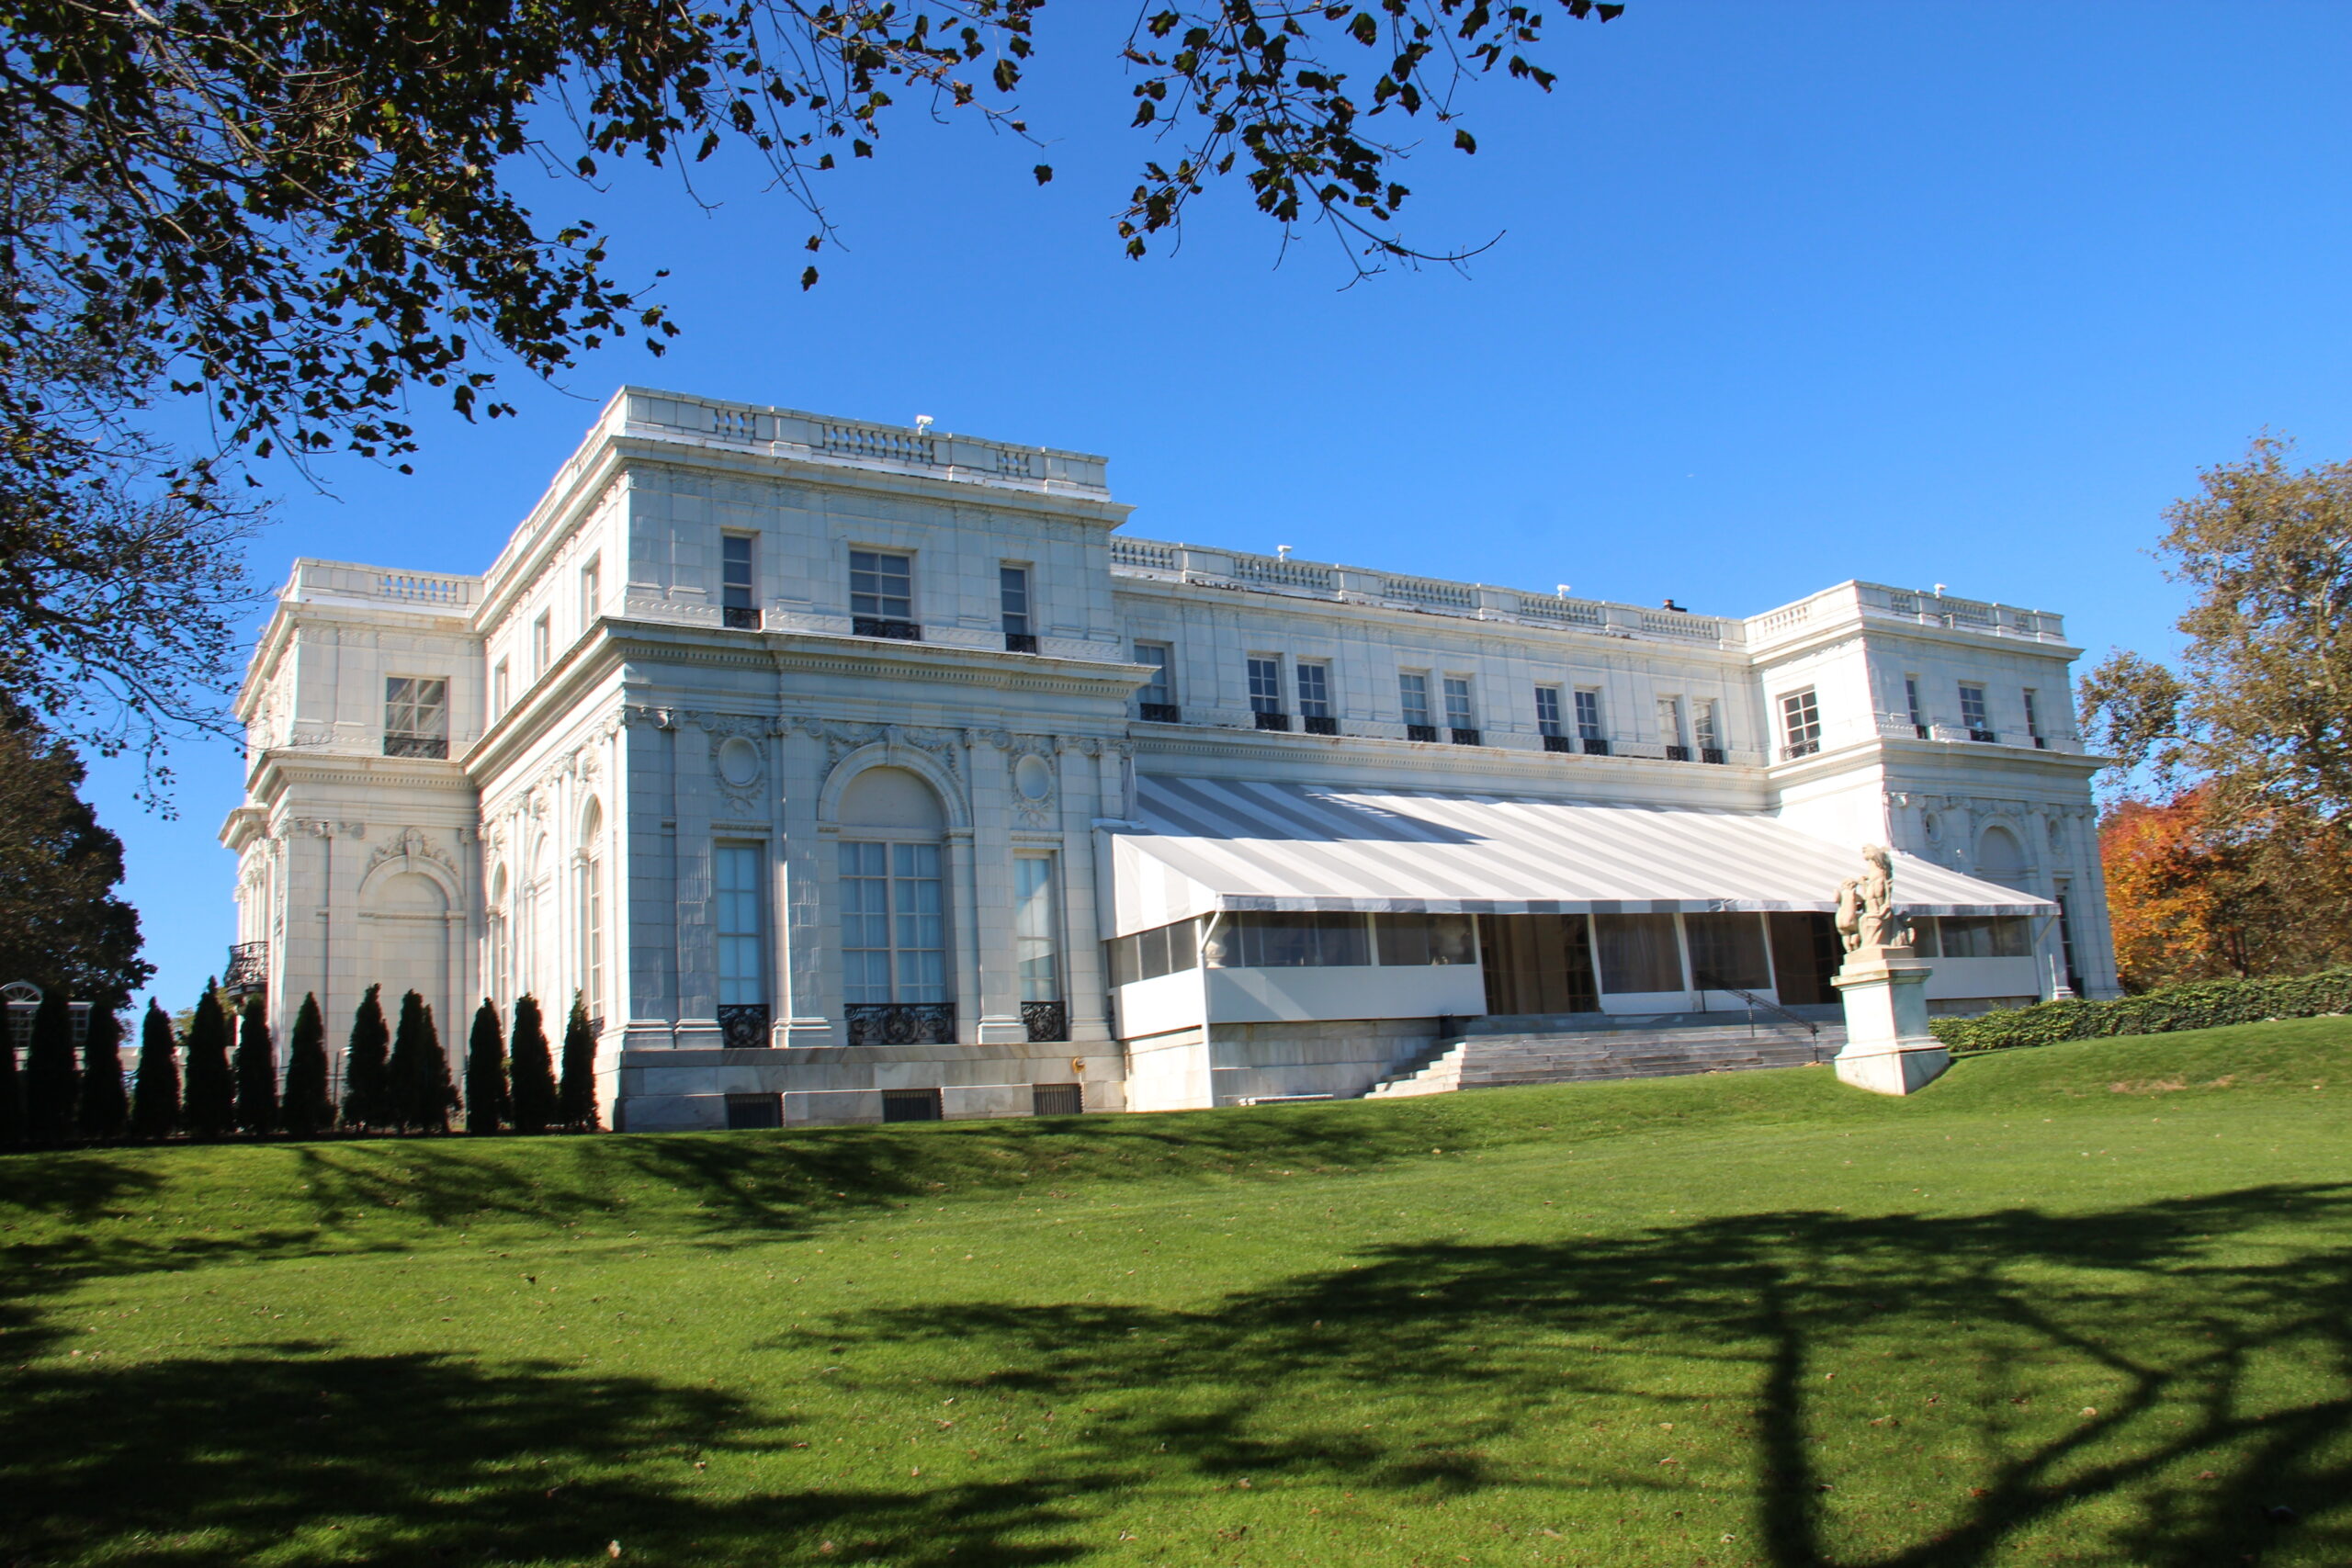 The Rosecliff Mansion.